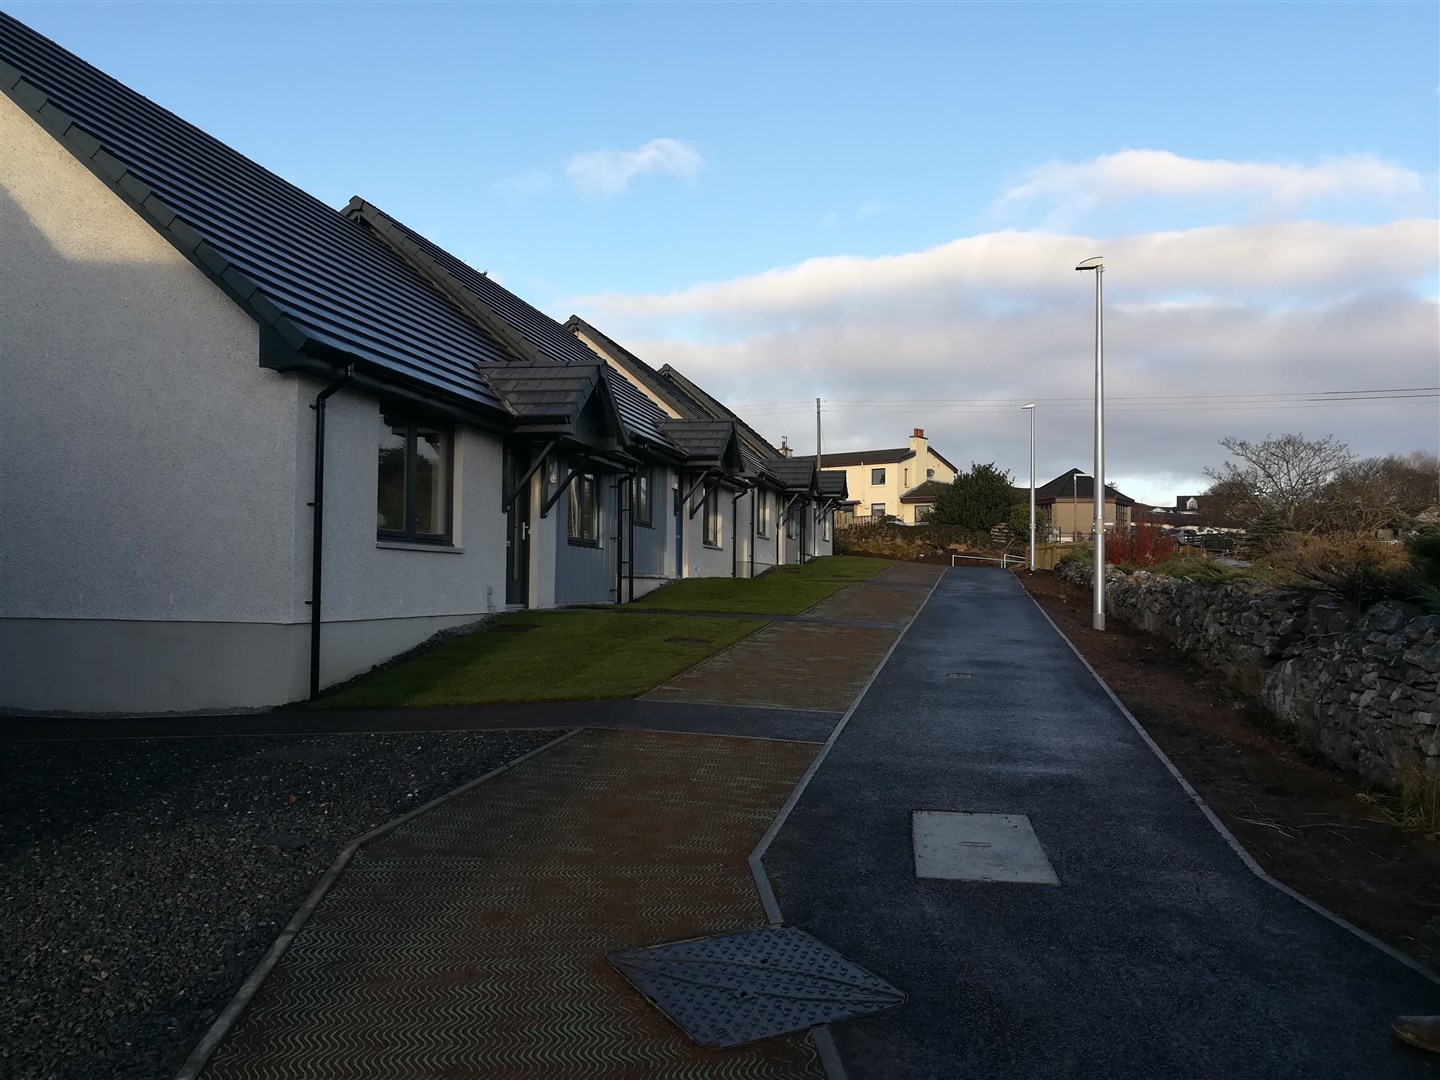 Some of the new bungalows in Gairloch.